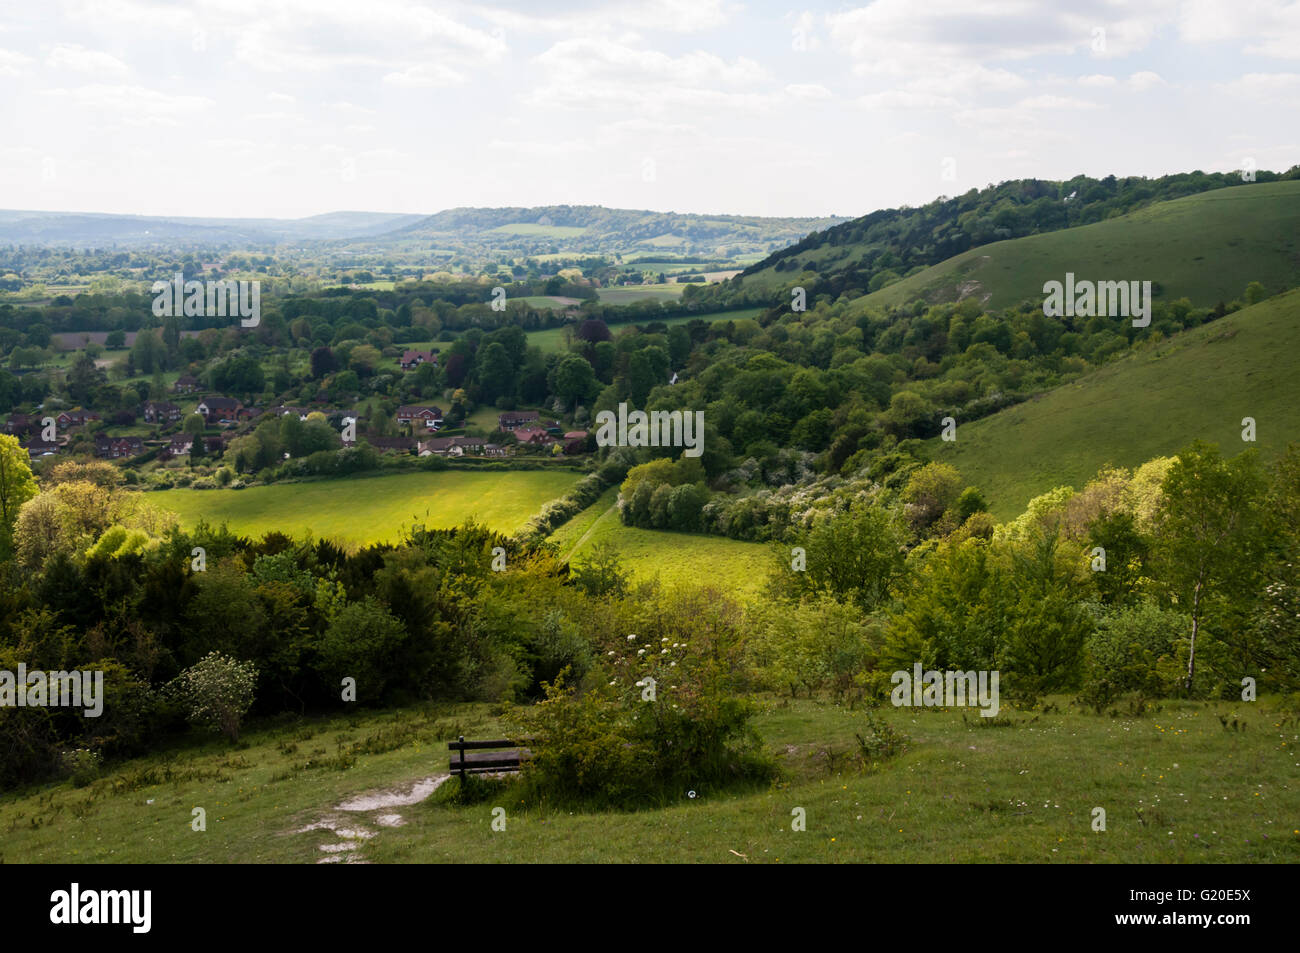 The south-facing scarp slope of the North Downs above Reigate in Surrey, forming part of the green belt to the south of London. Stock Photo